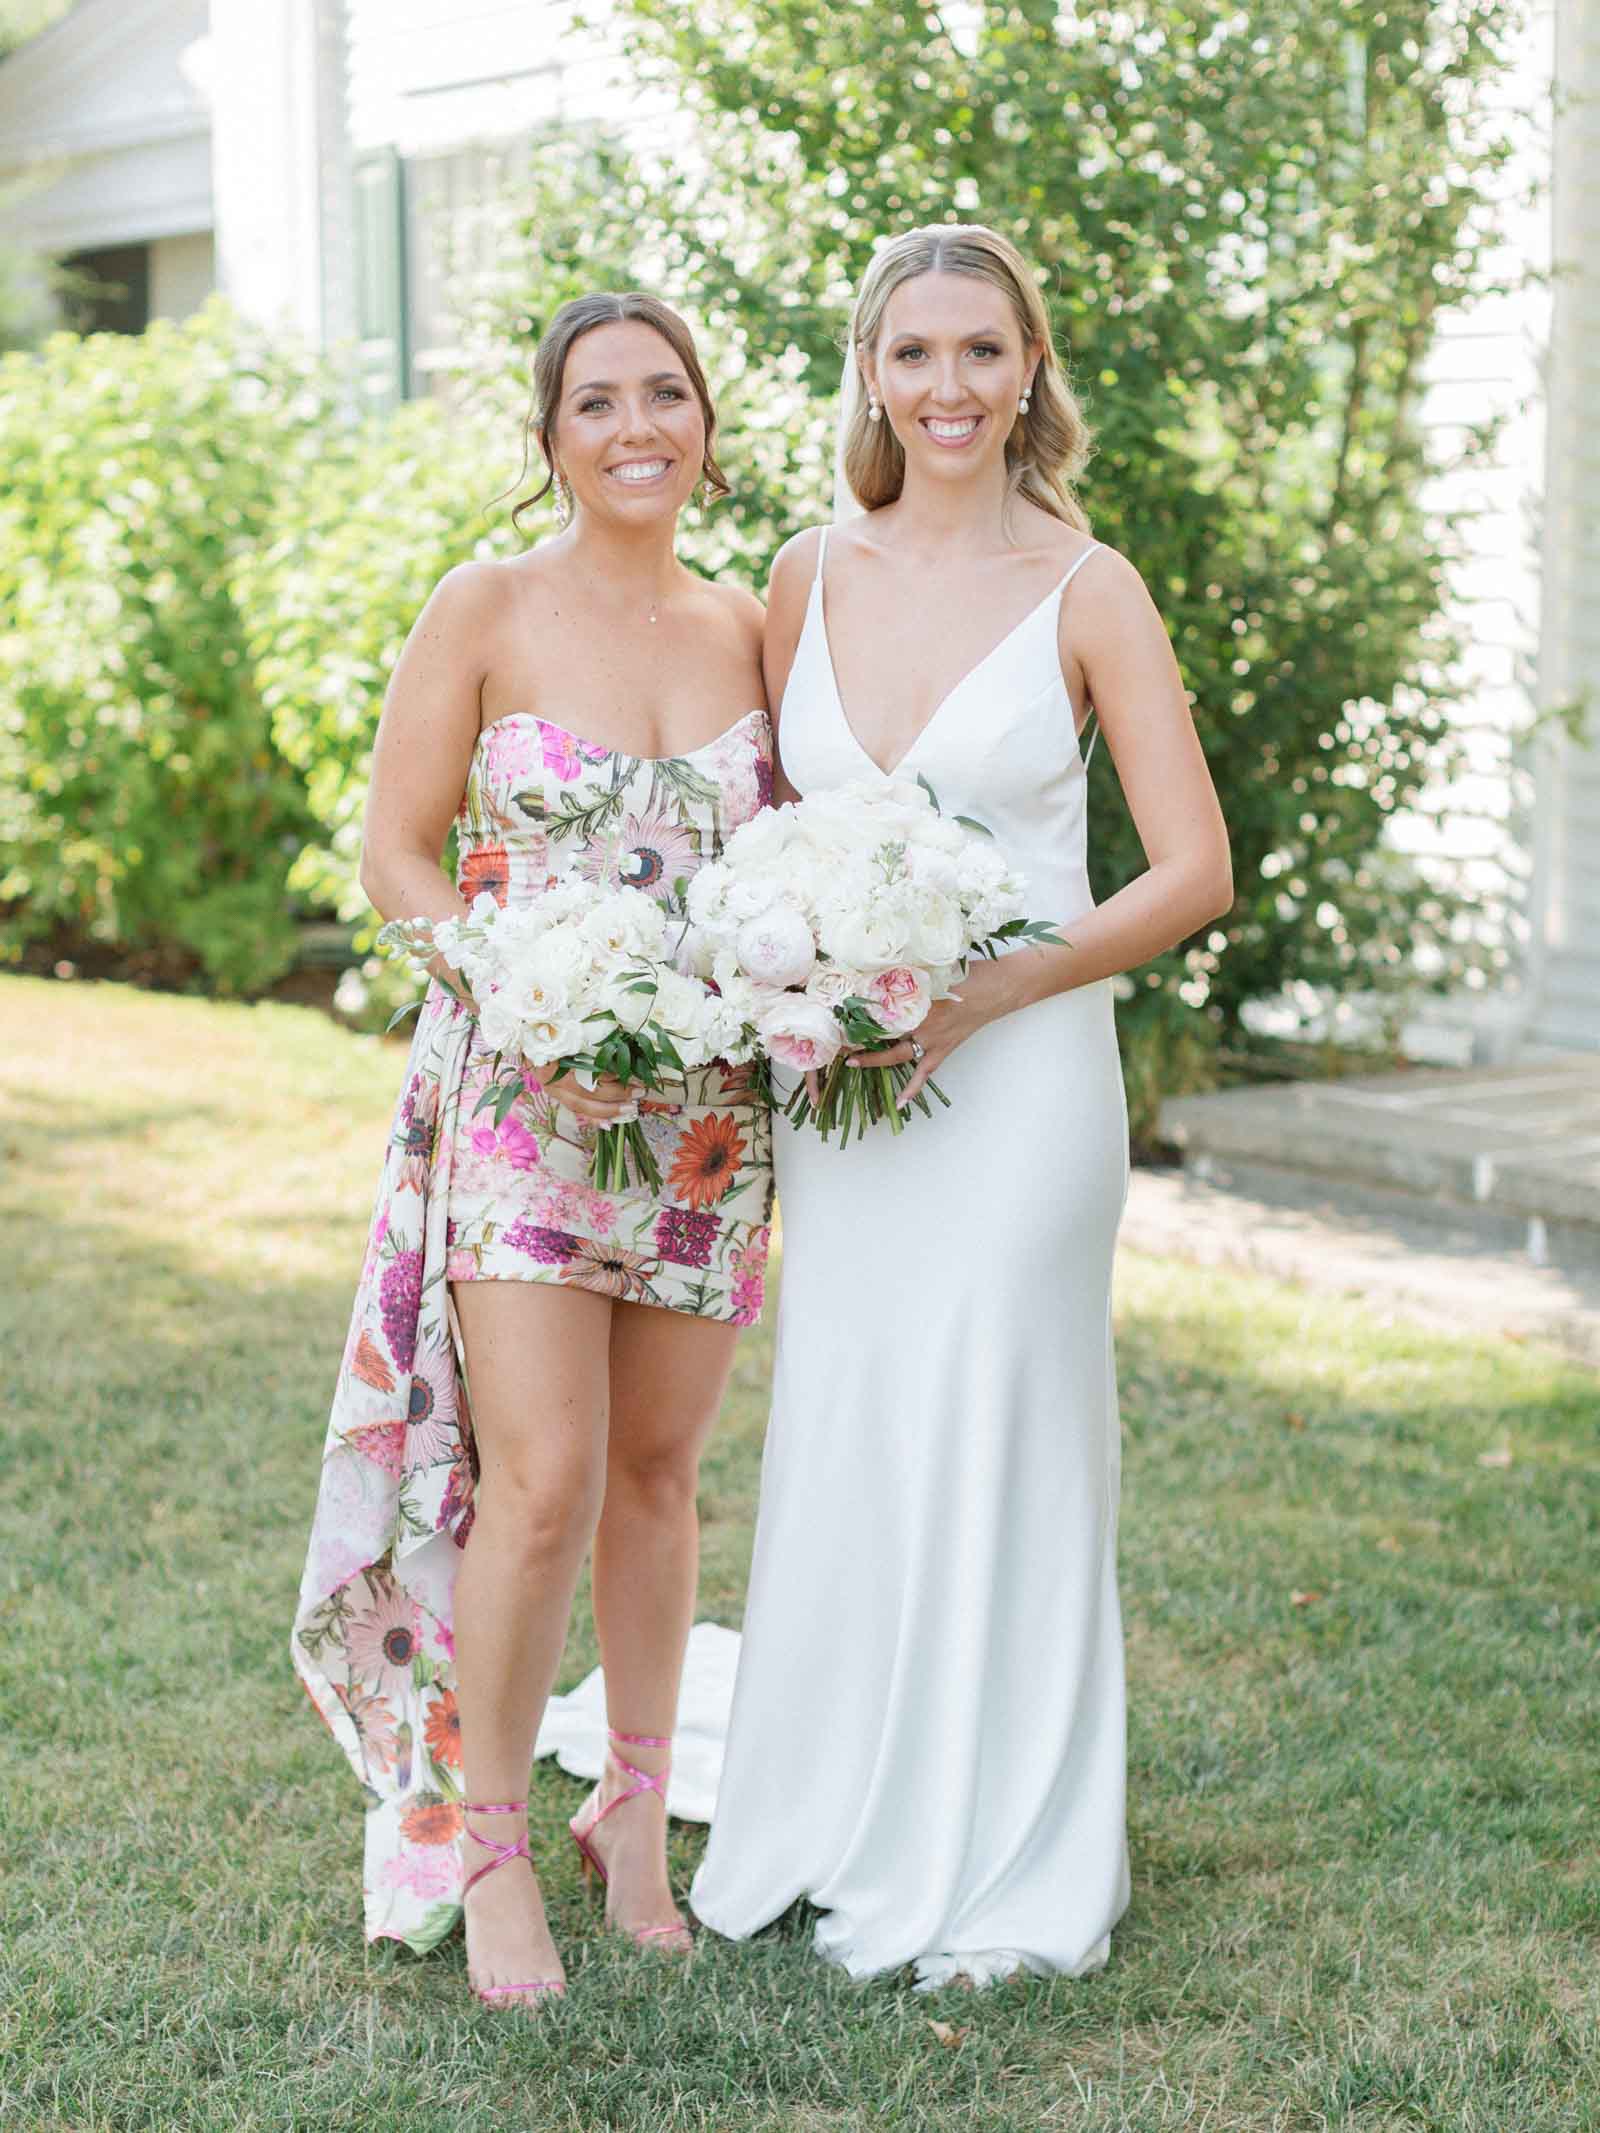 Maid of Honor and Bride
